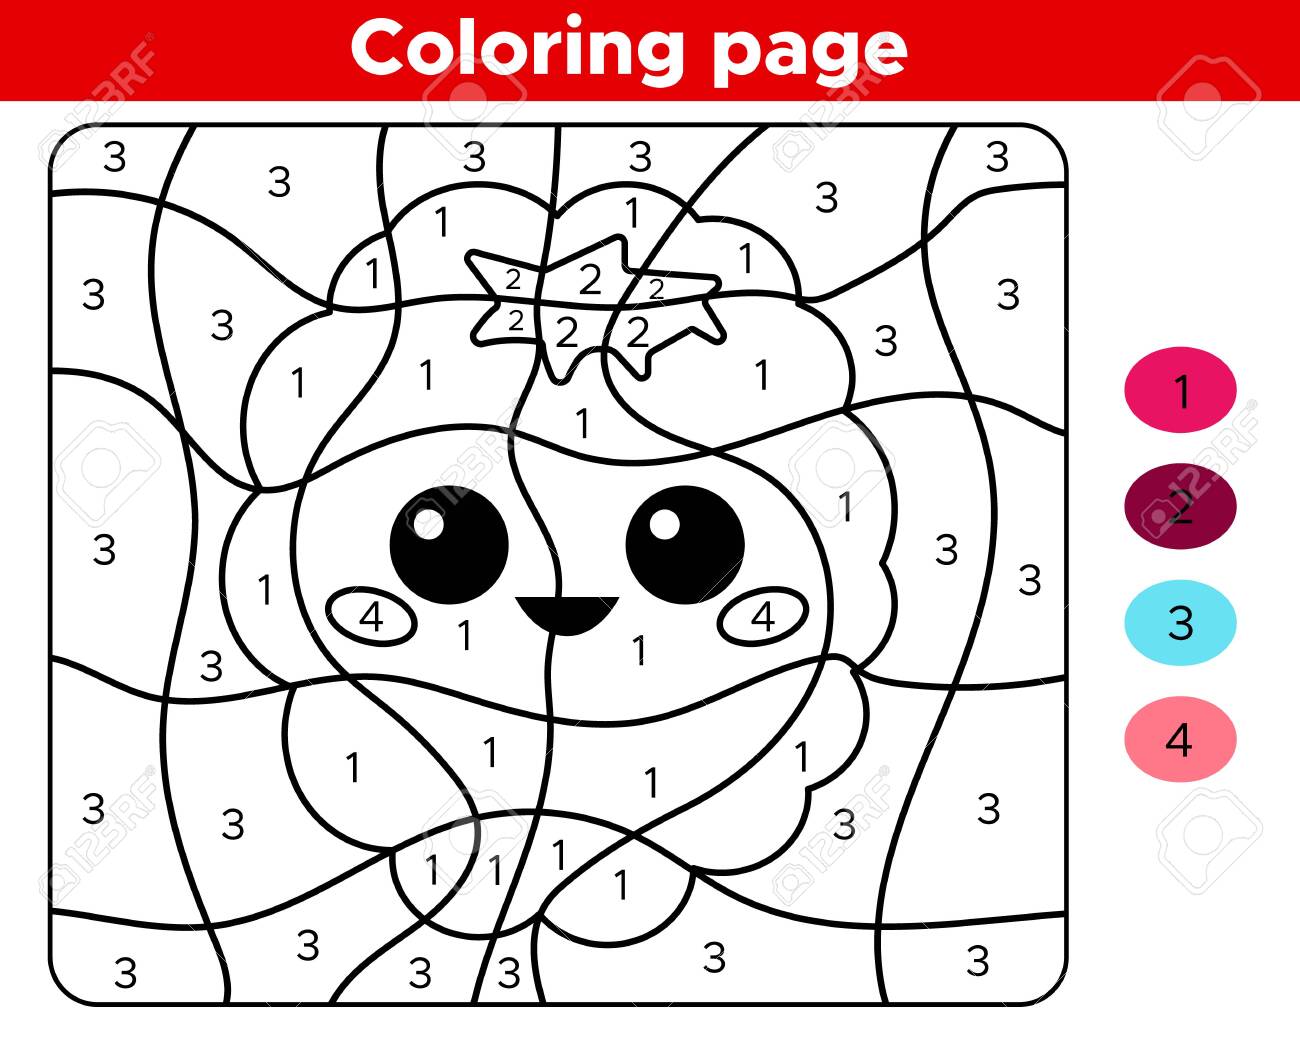 Number coloring page for preschoolers cute kawaii raspberry cartoon character educational game for children royalty free svg cliparts vectors and stock illustration image